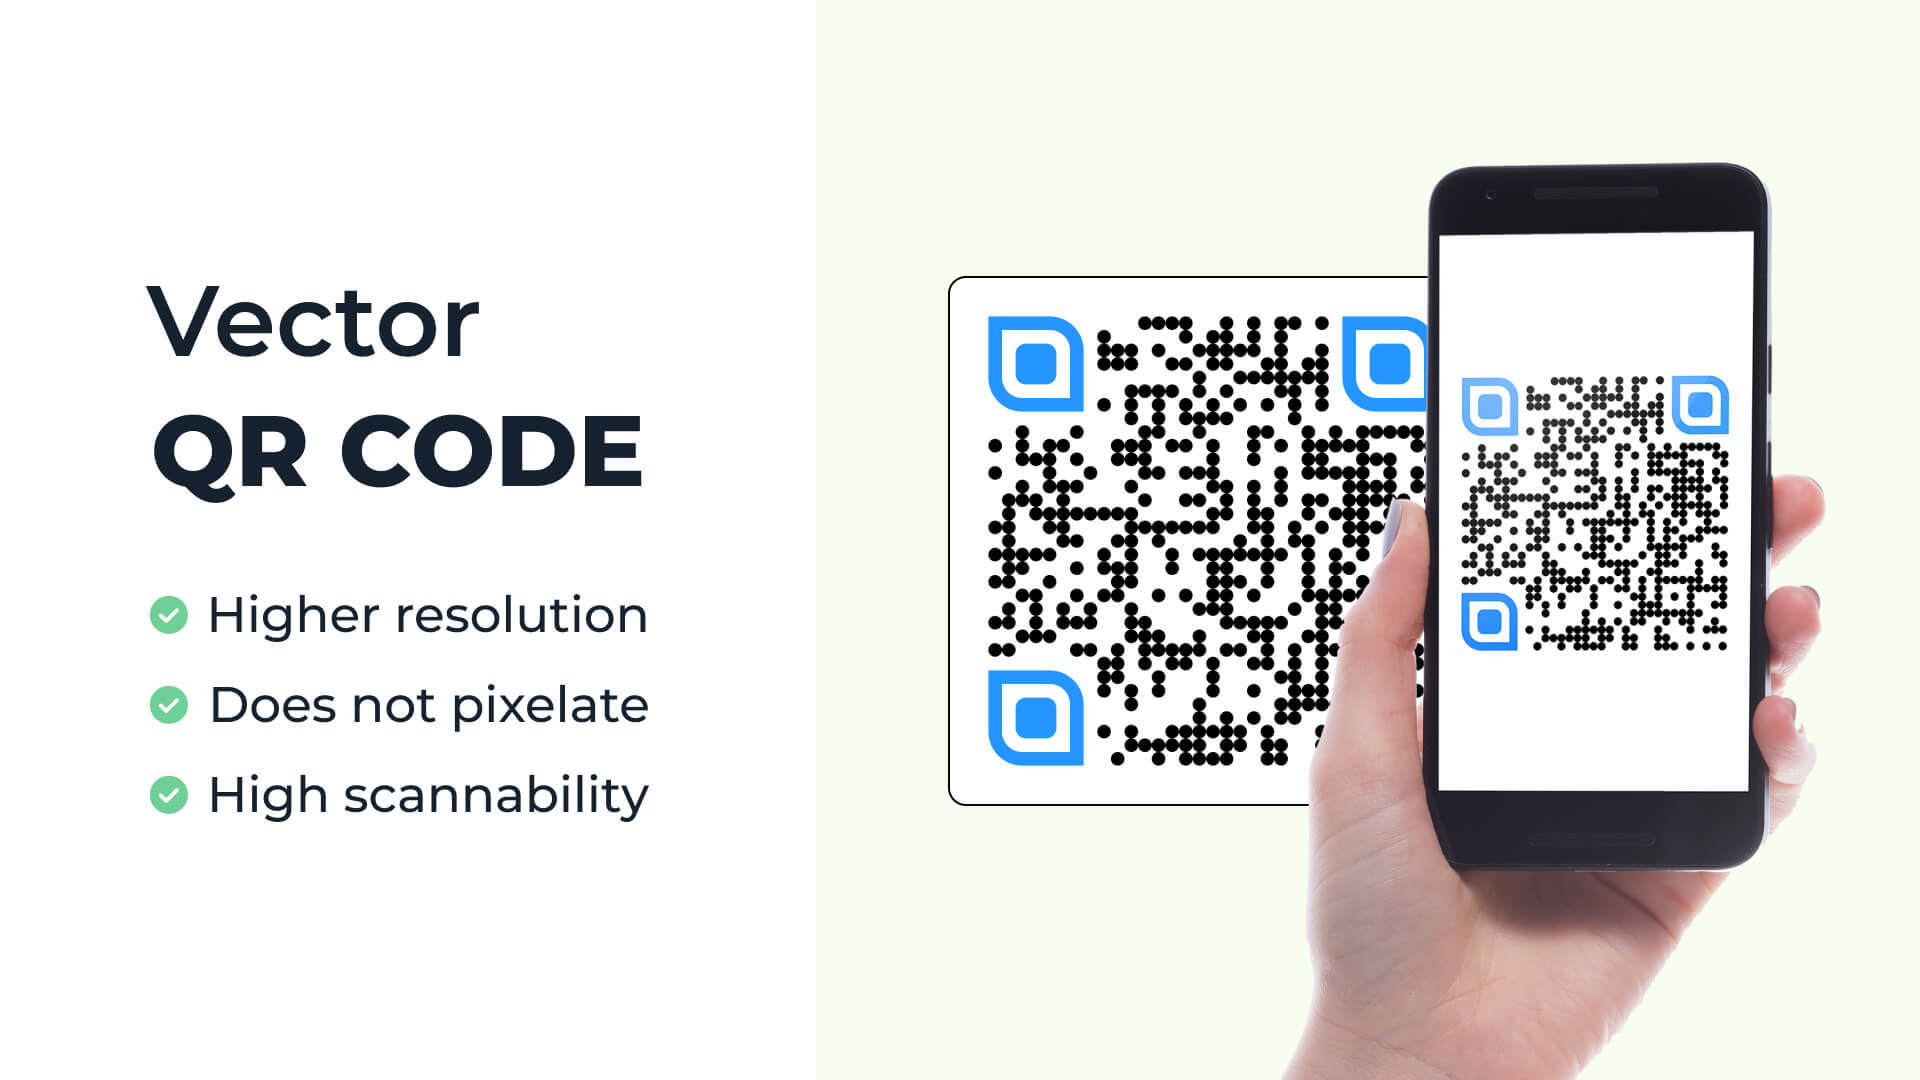 Marketing growth with the power of vector QR Codes